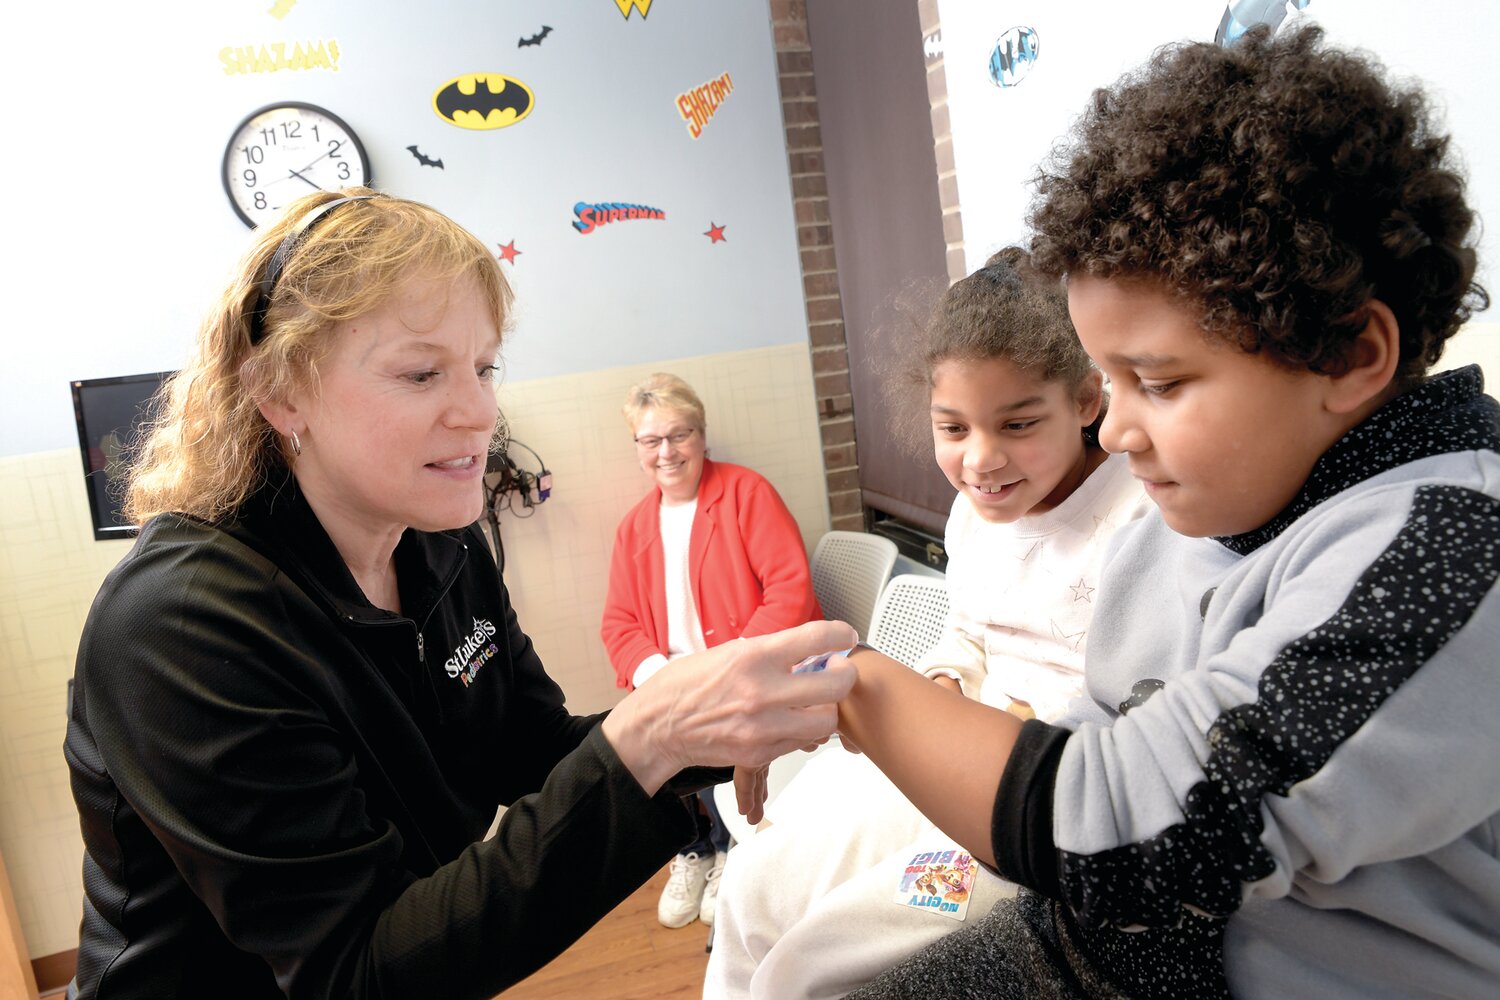 Grandmother Robin Geiger watches as case manager Terry Gregg, registered nurse, talks with her twin grandchildren, Sunny and Tizlam Gordon, at Star Community Health Pediatrics in Easton.